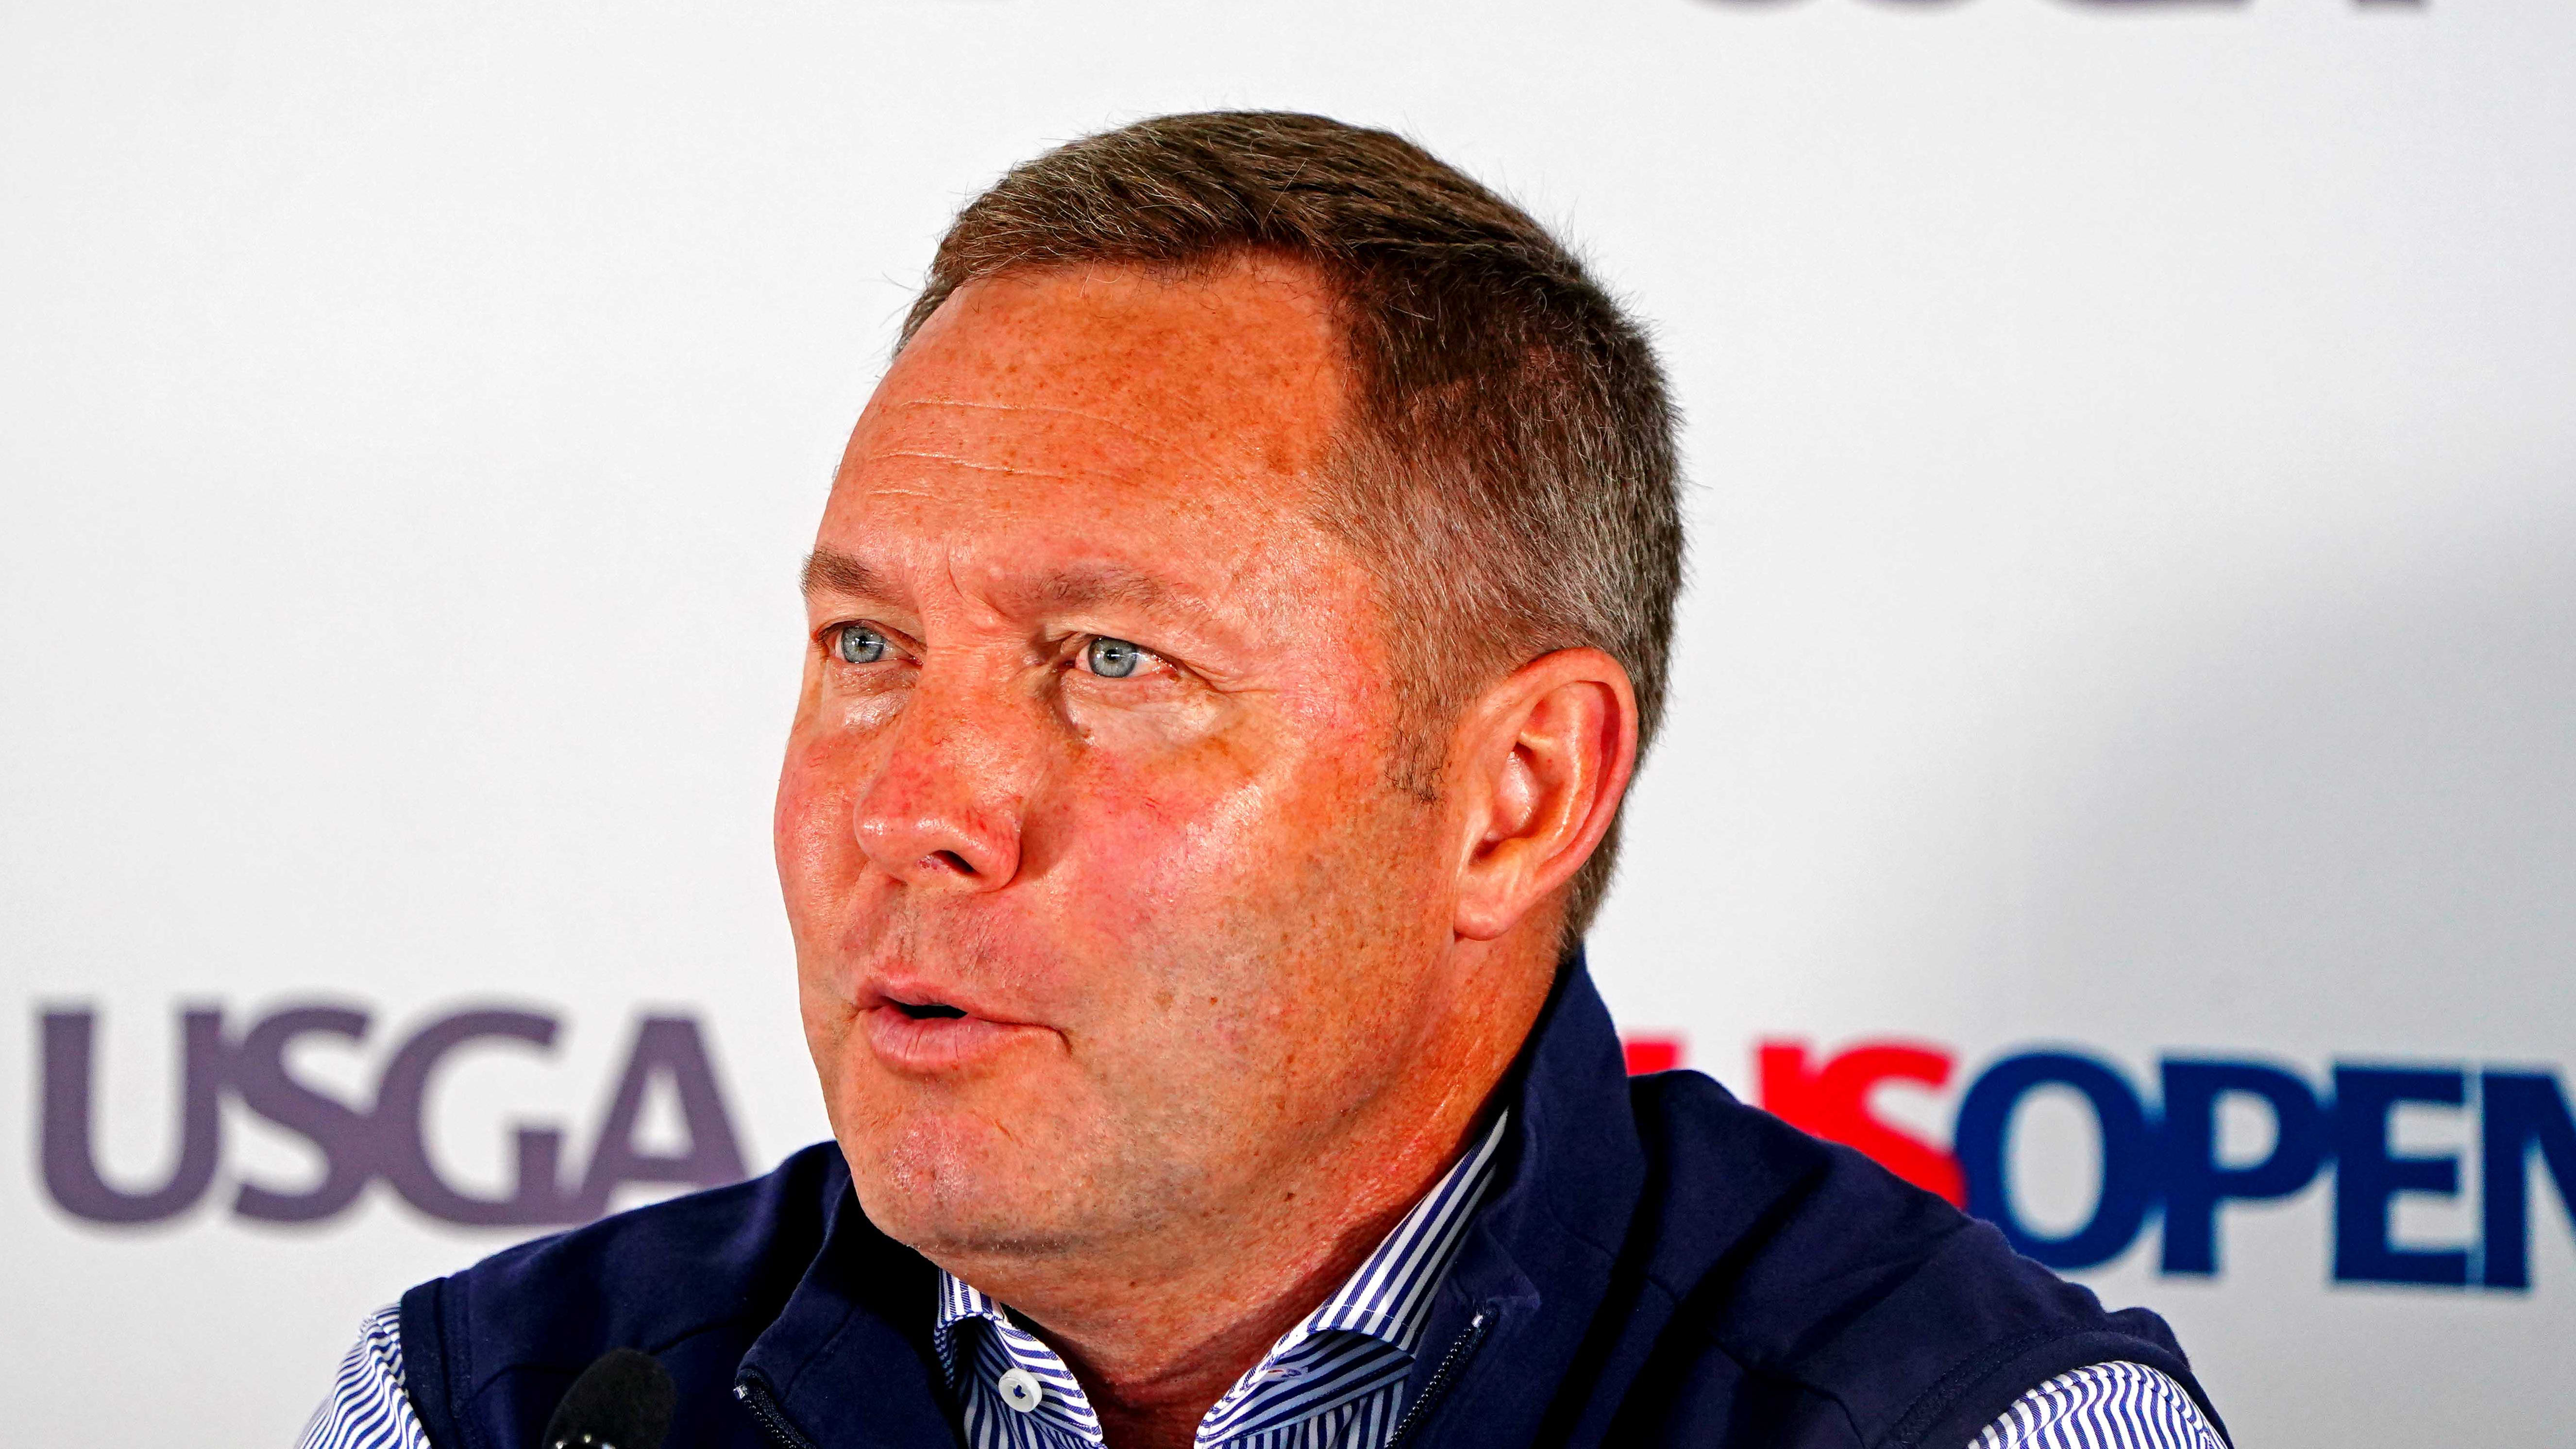 USGA Will Welcome LIV Players to U.S. Open ‘With Open Arms’ If They Qualify 